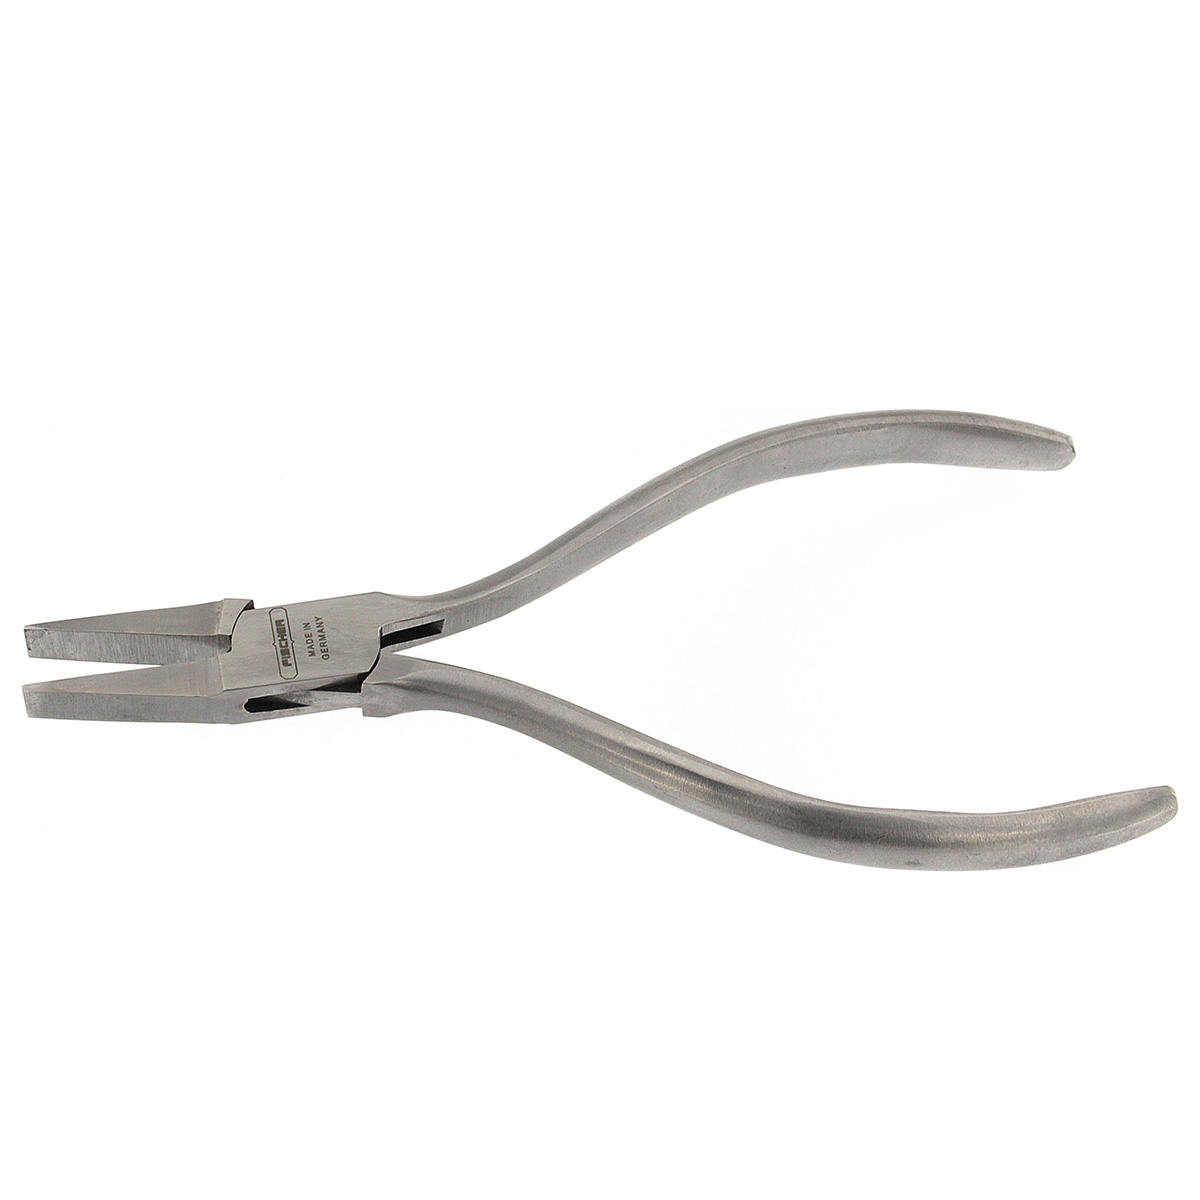 Flat nose pliers without cut, length 130 mm, jaw width 6 mm